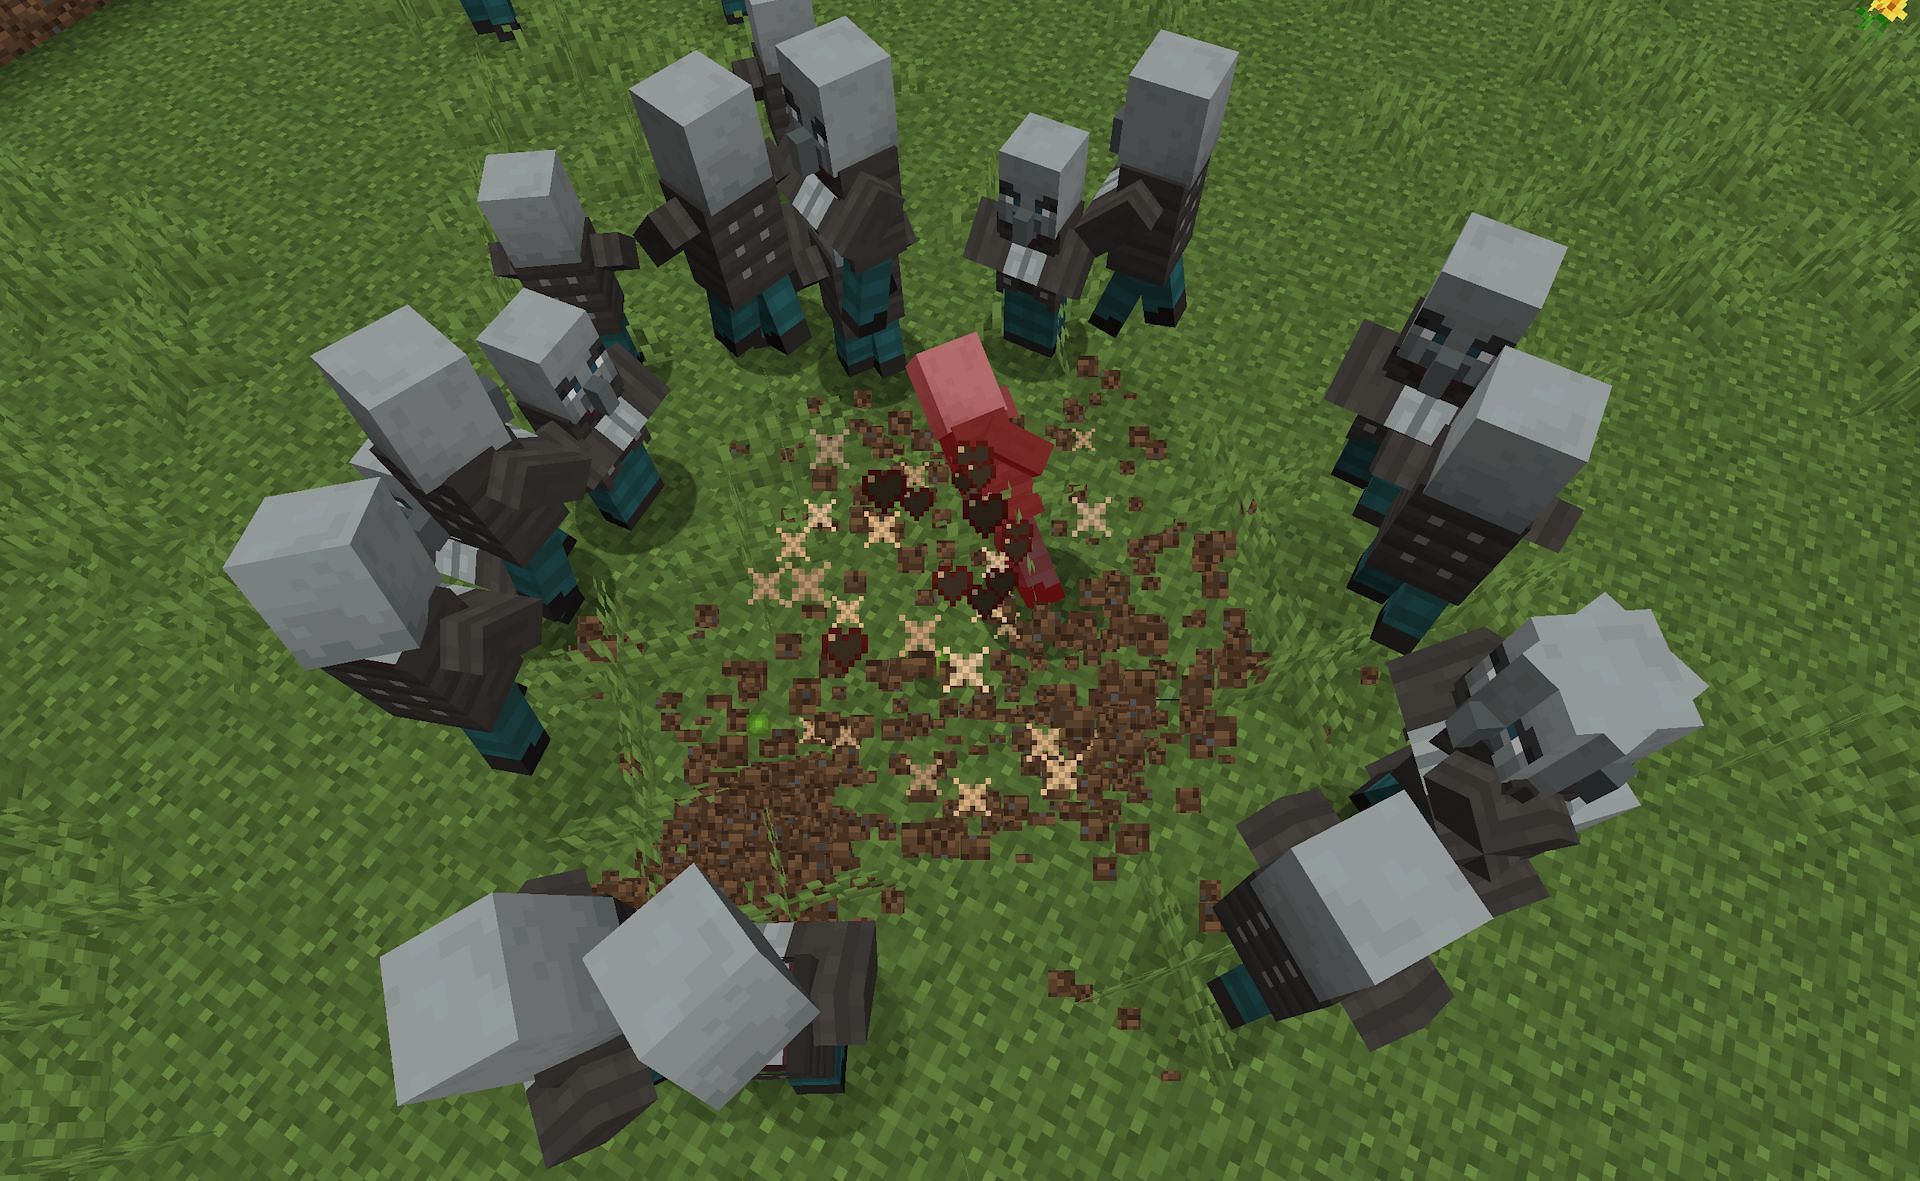 This AOE blast is unlike anything else in the game (Image via Mojang)